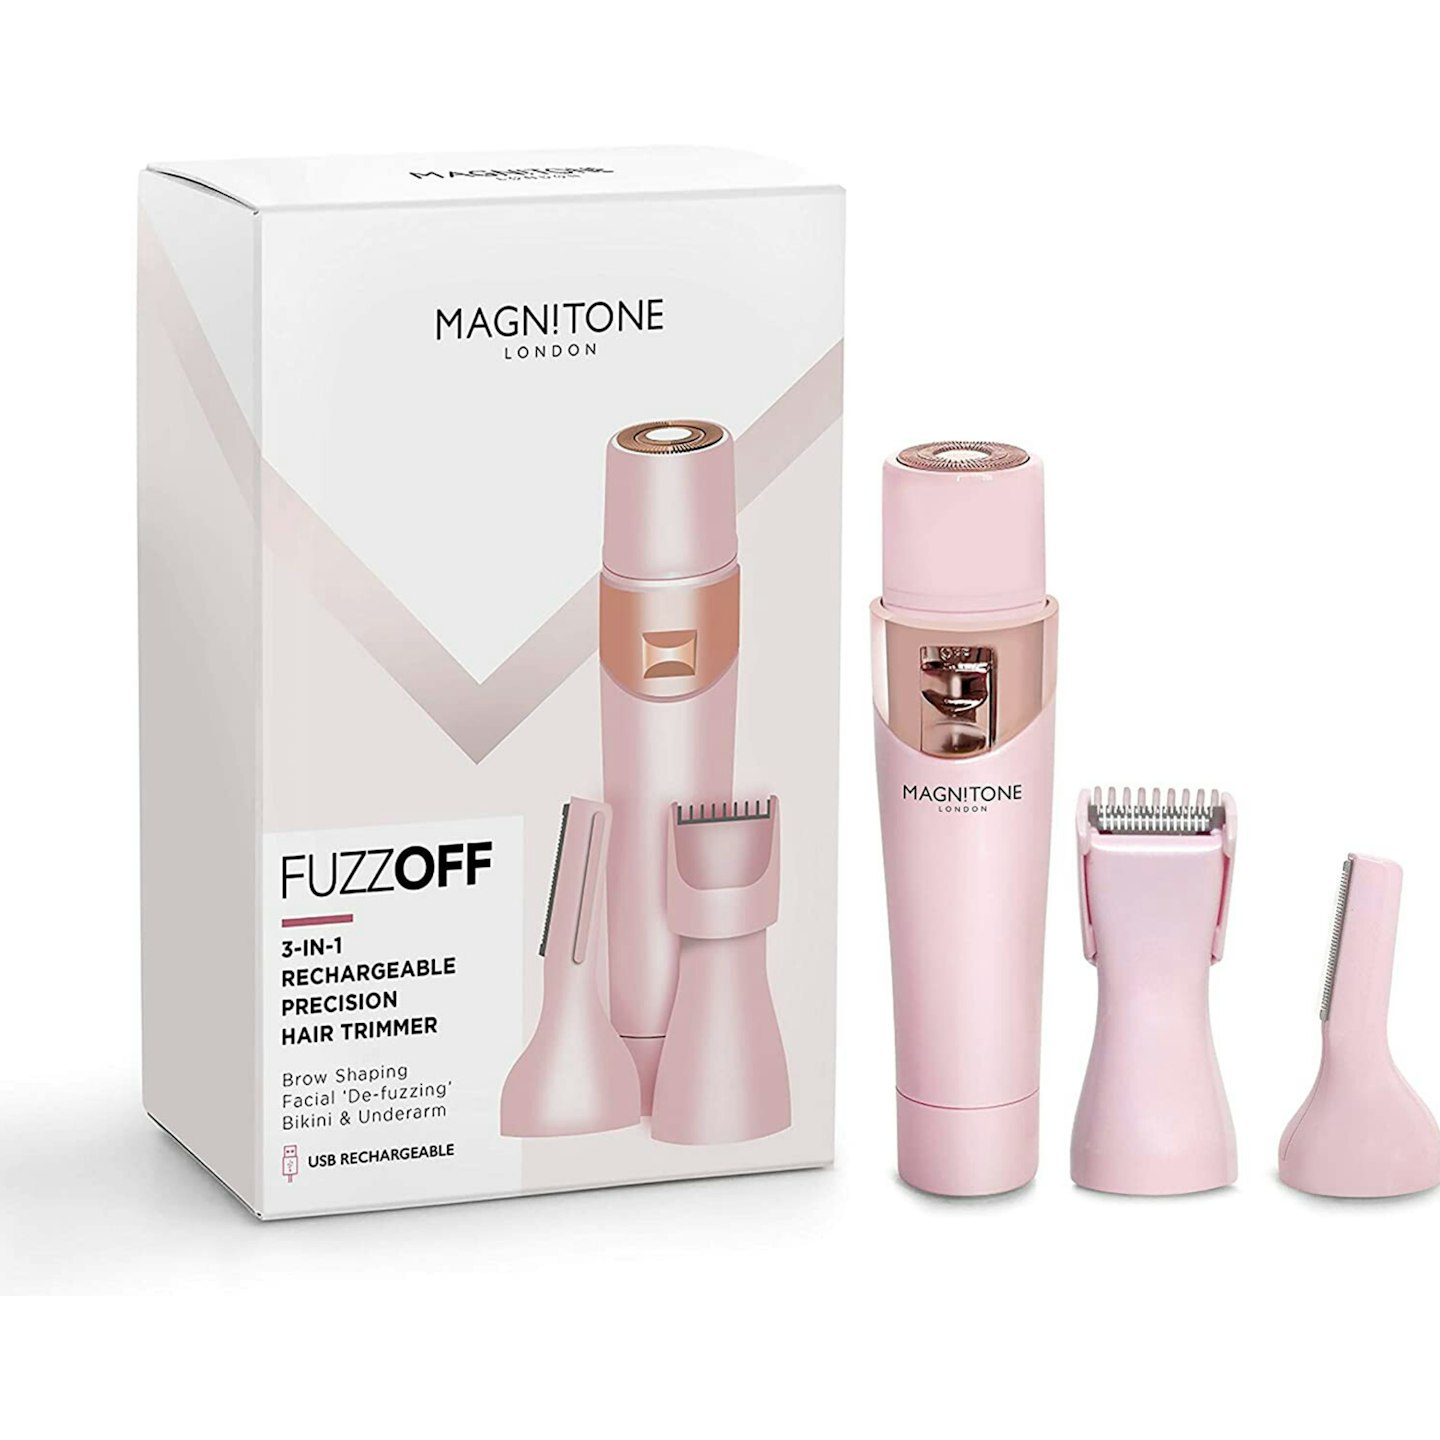 Magnitone FuzzOff 3-in-1 Rechargeable Ladies Precision Hair Trimmer